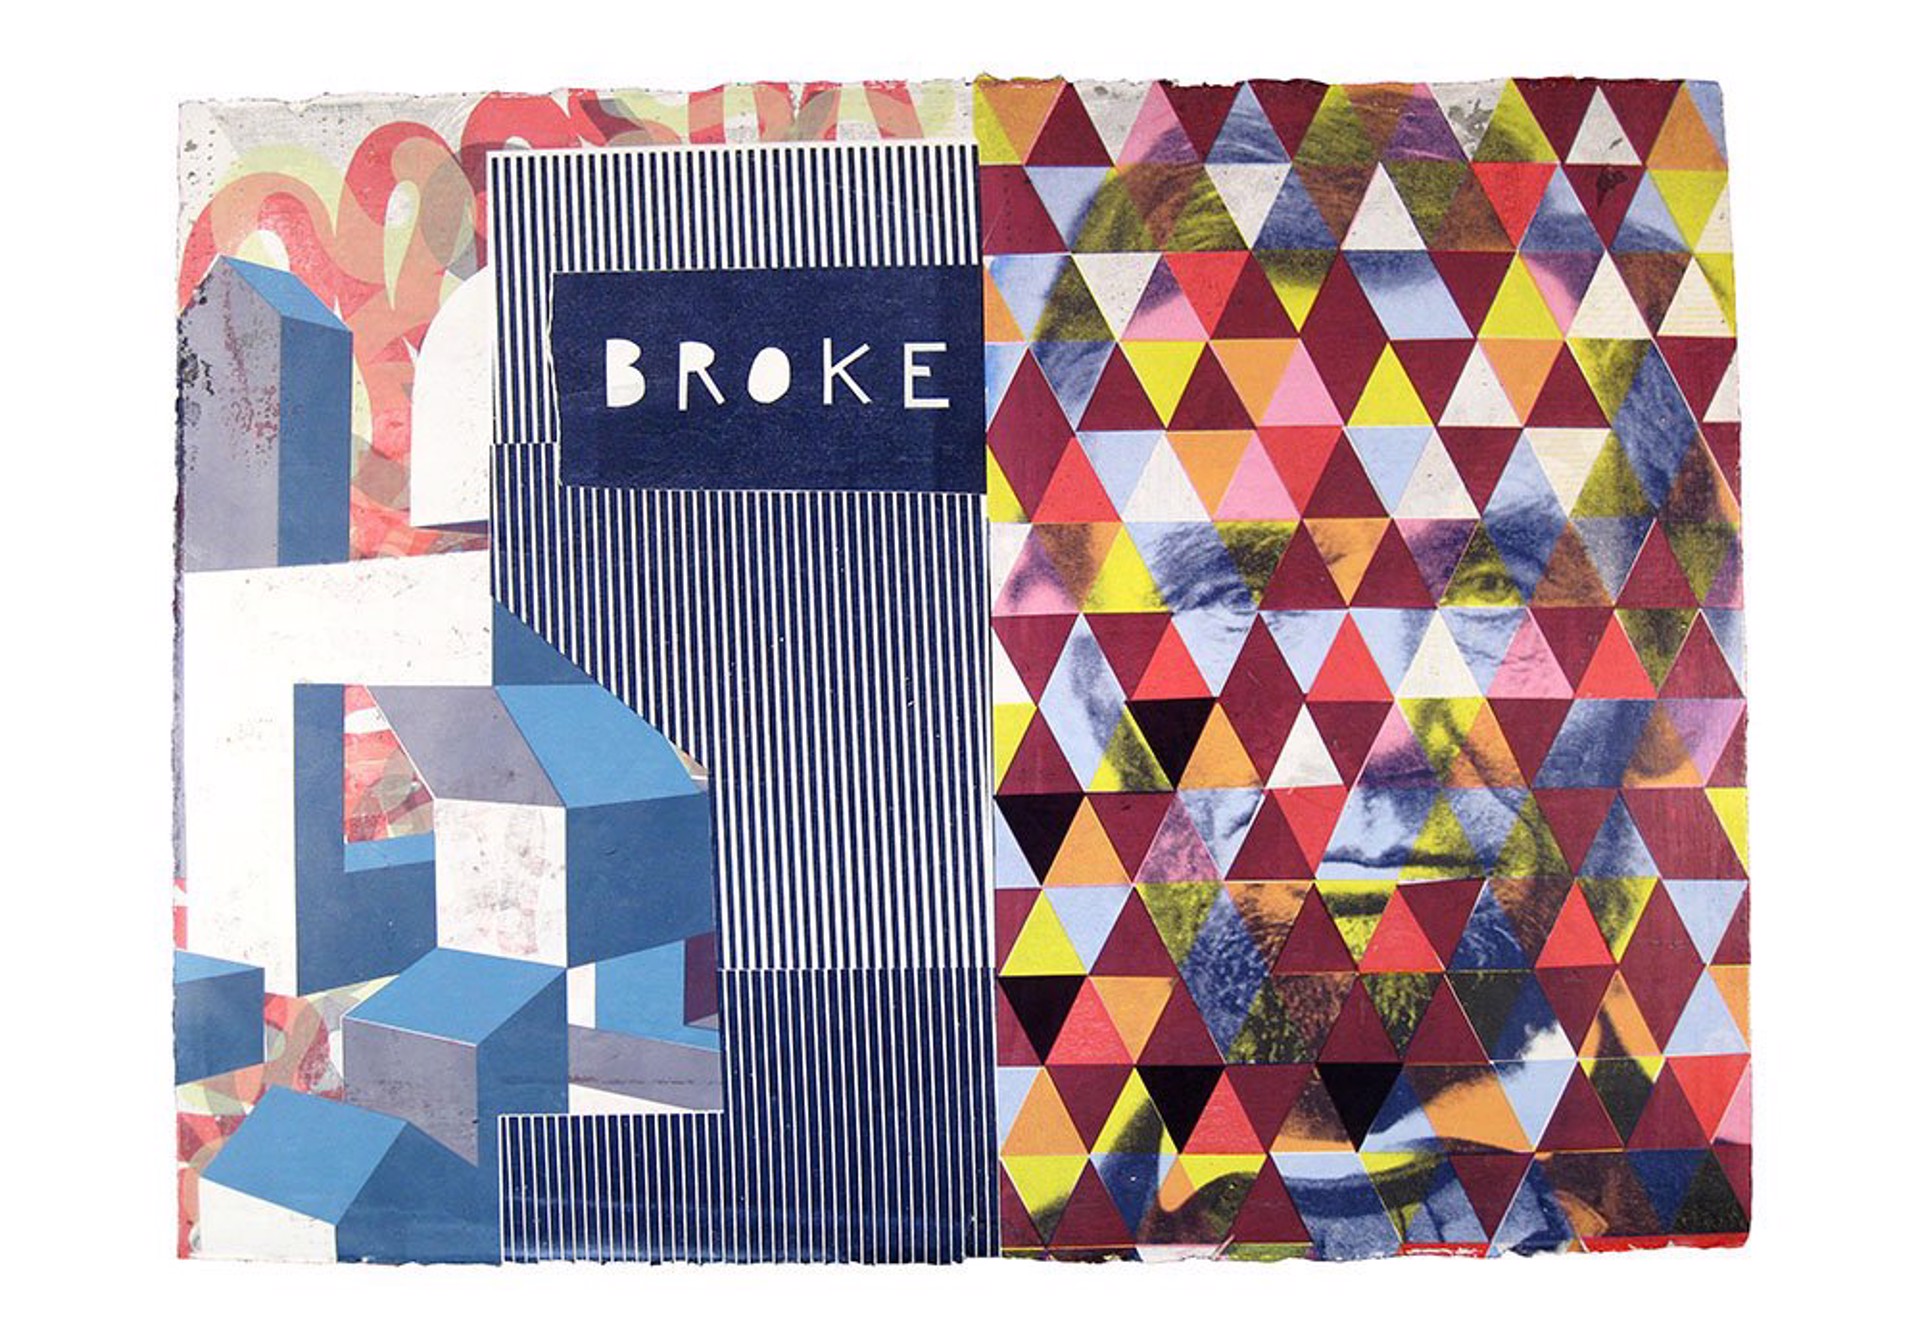 Broke by Chadwick Tolley